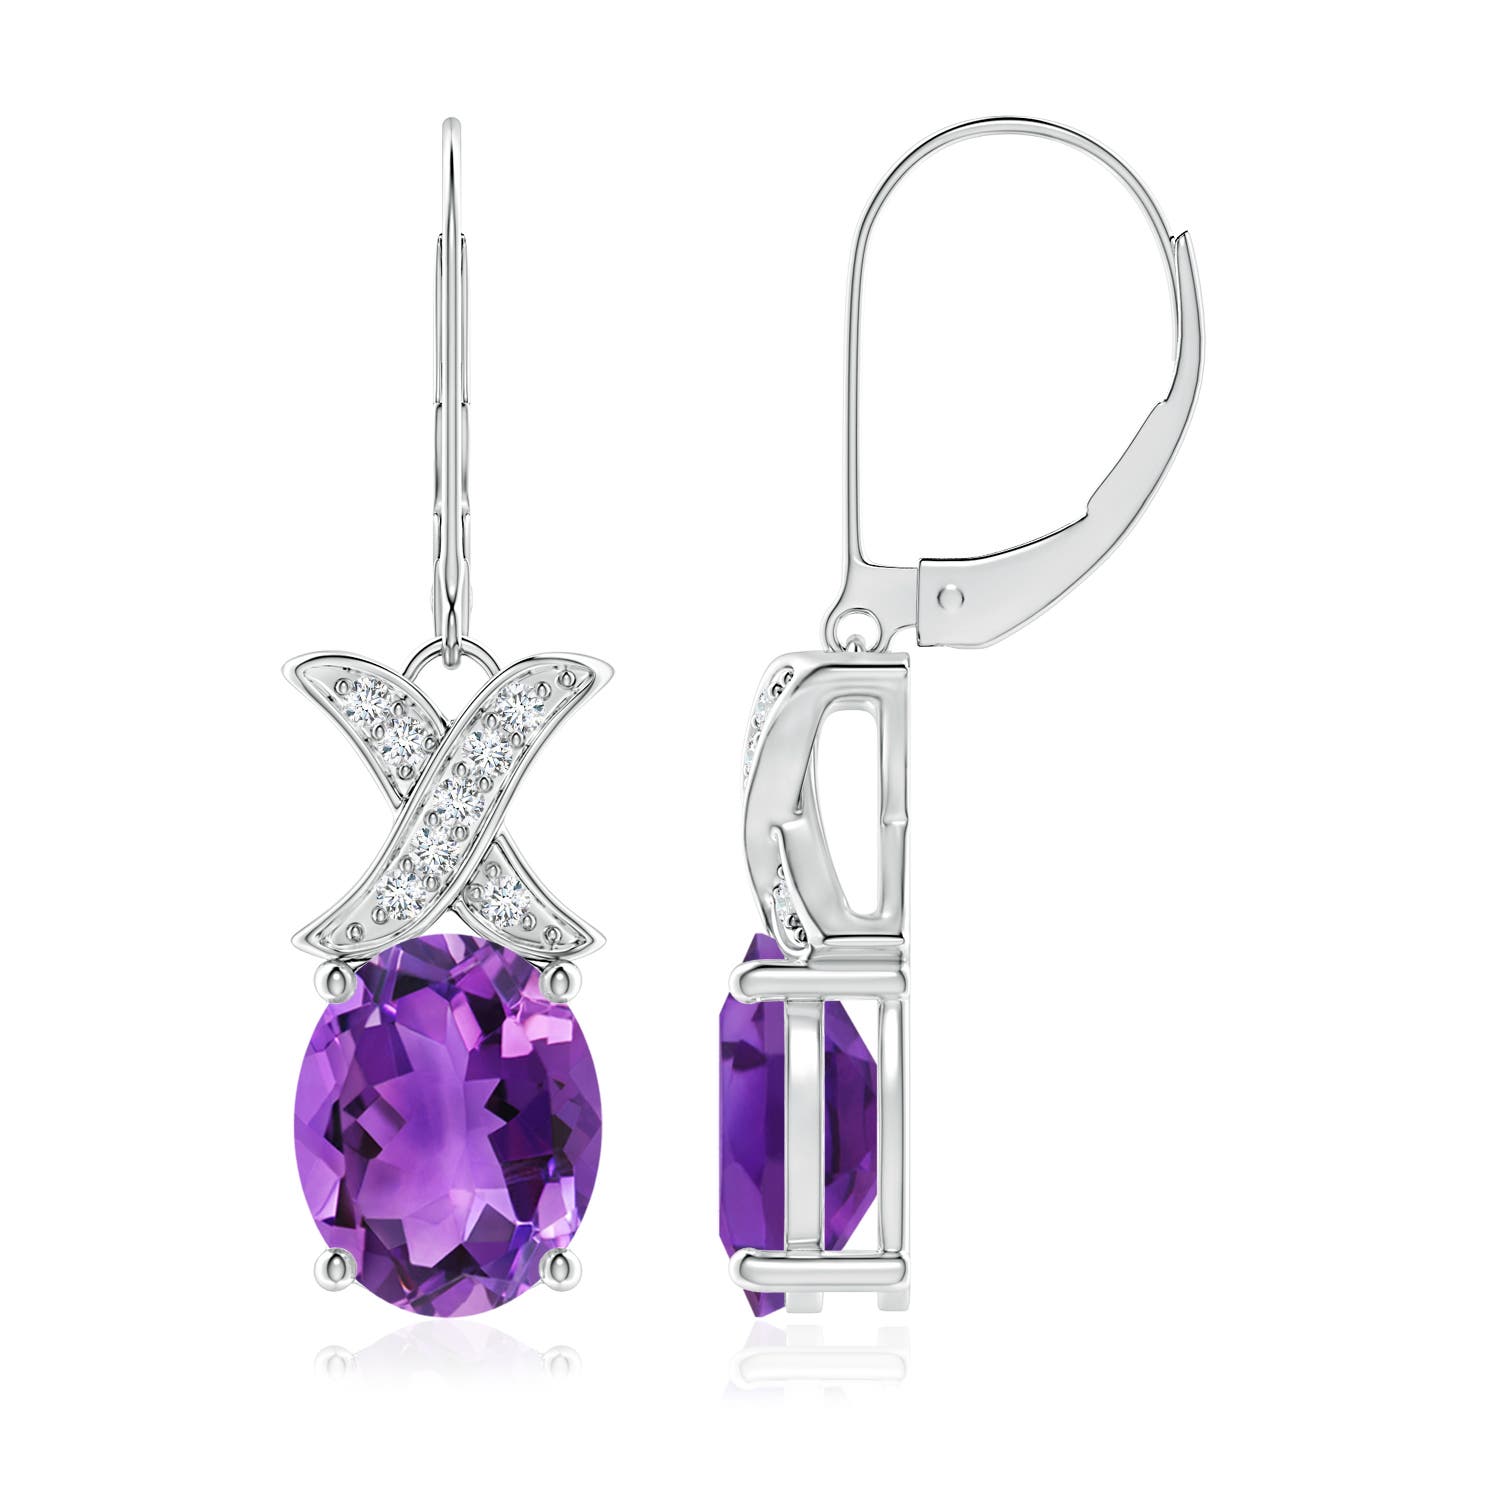 AAA - Amethyst / 4.69 CT / 14 KT White Gold